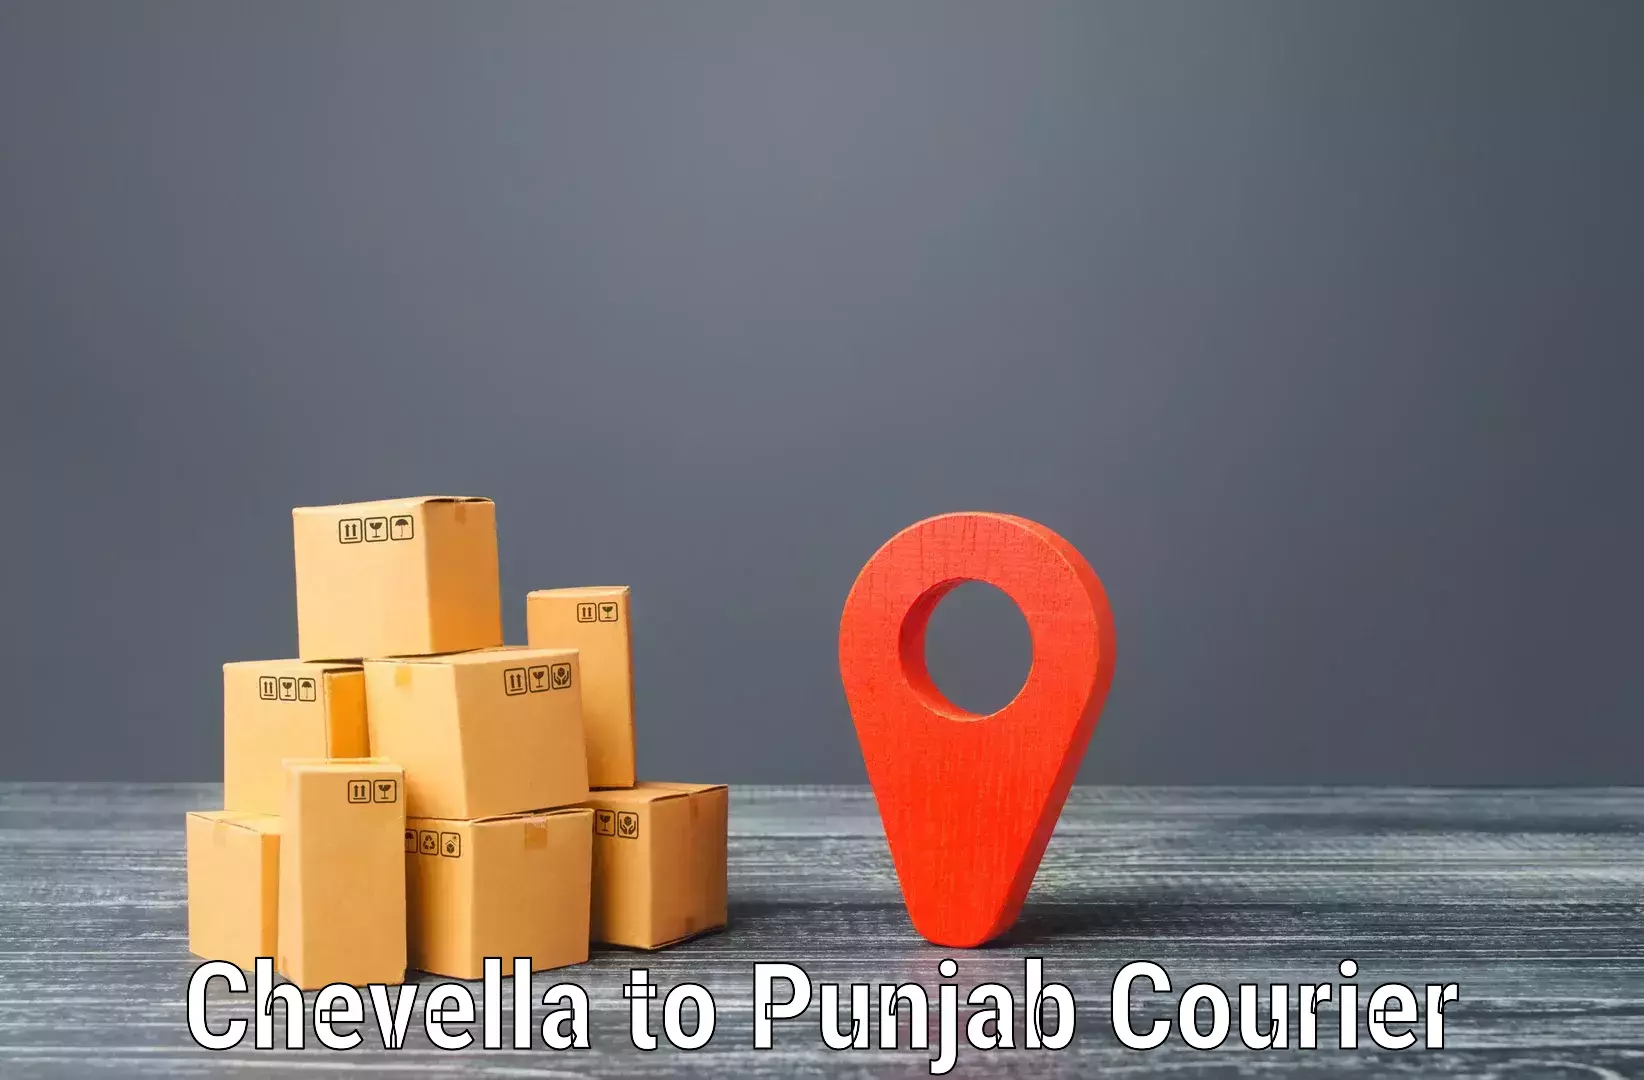 On-demand courier Chevella to Dhilwan